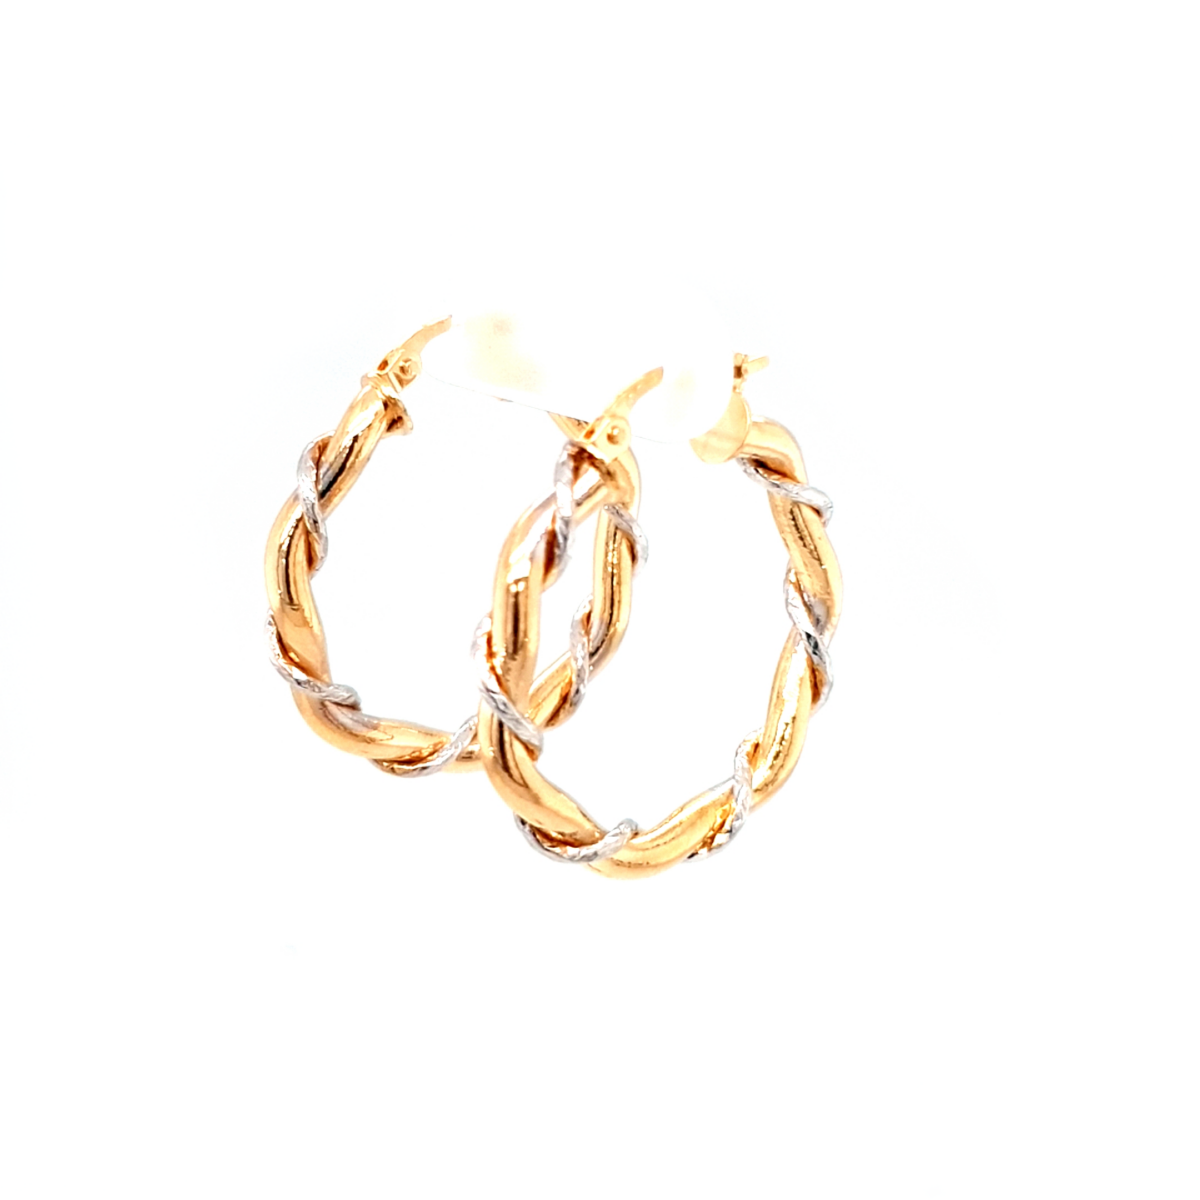 Leon Baker 9K Yellow and White Gold Twisted Hoop Earrings_1